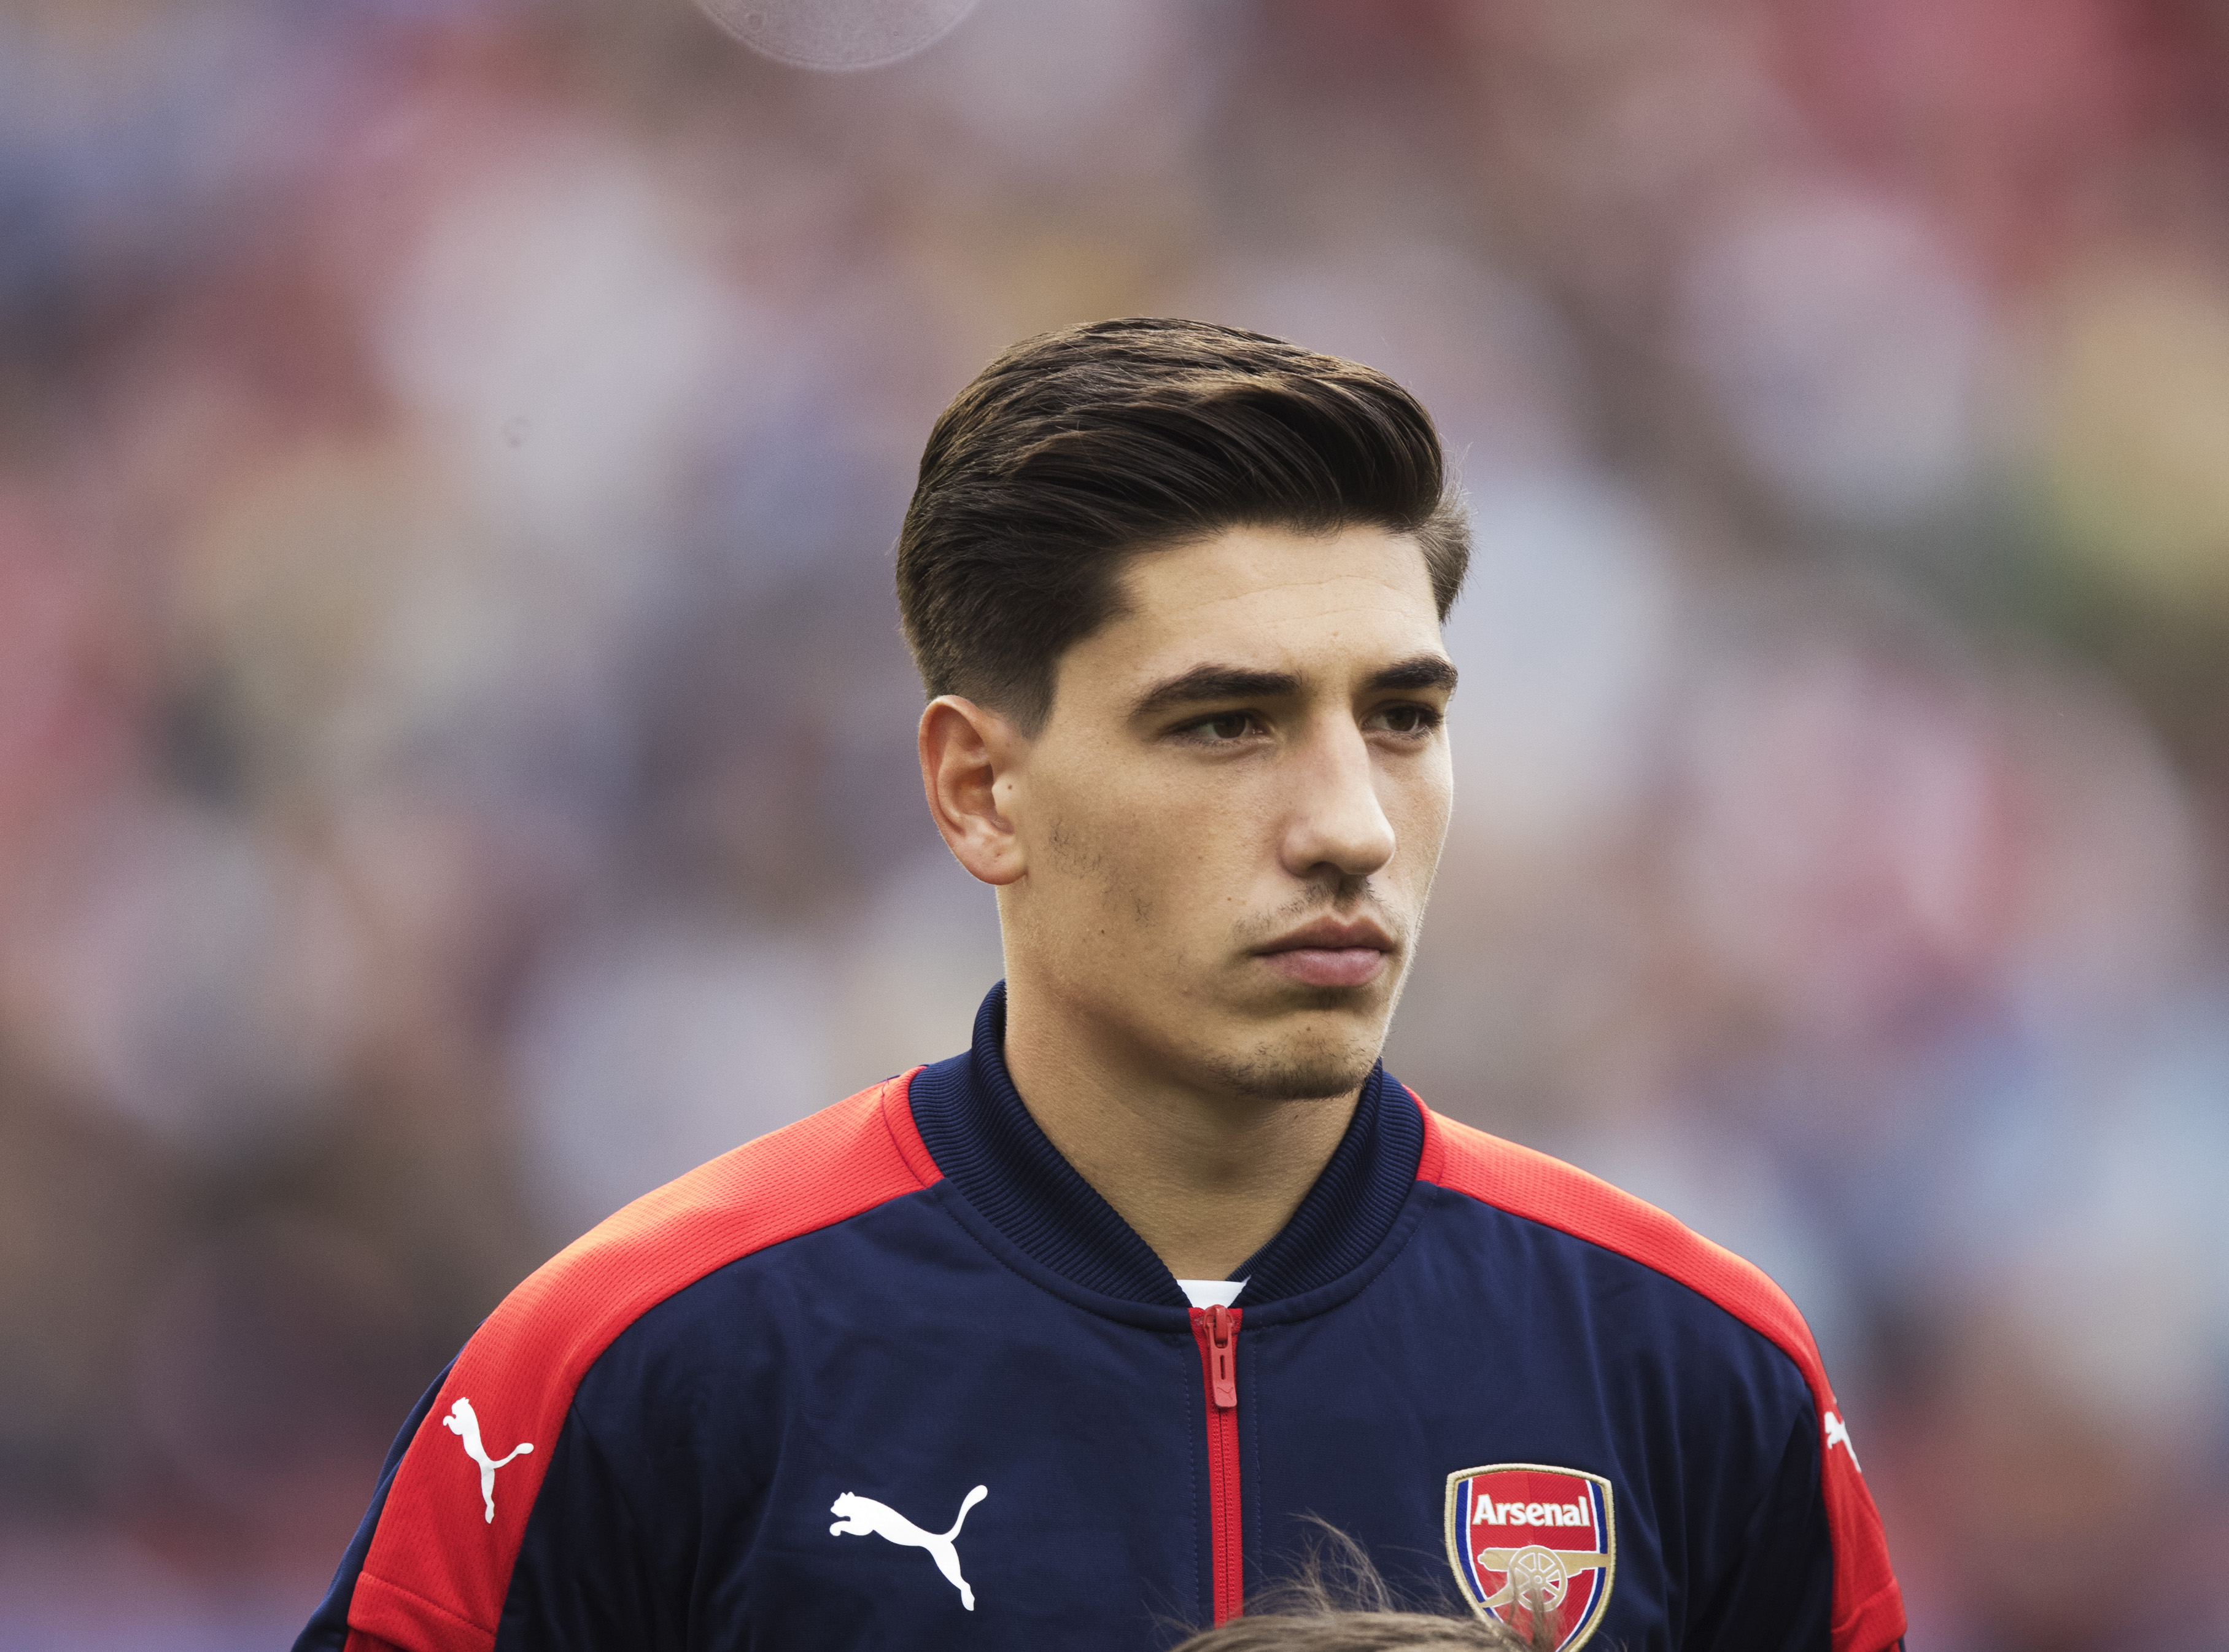 GOTHENBURG, SWEDEN - AUGUST 07: Hector Bellerin of Arsenal during the Pre-Season Friendly between Arsenal and Manchester City at Ullevi on August 7, 2016 in Gothenburg, Sweden. (Photo by Nils Petter Nilsson/Ombrello/Getty Images)